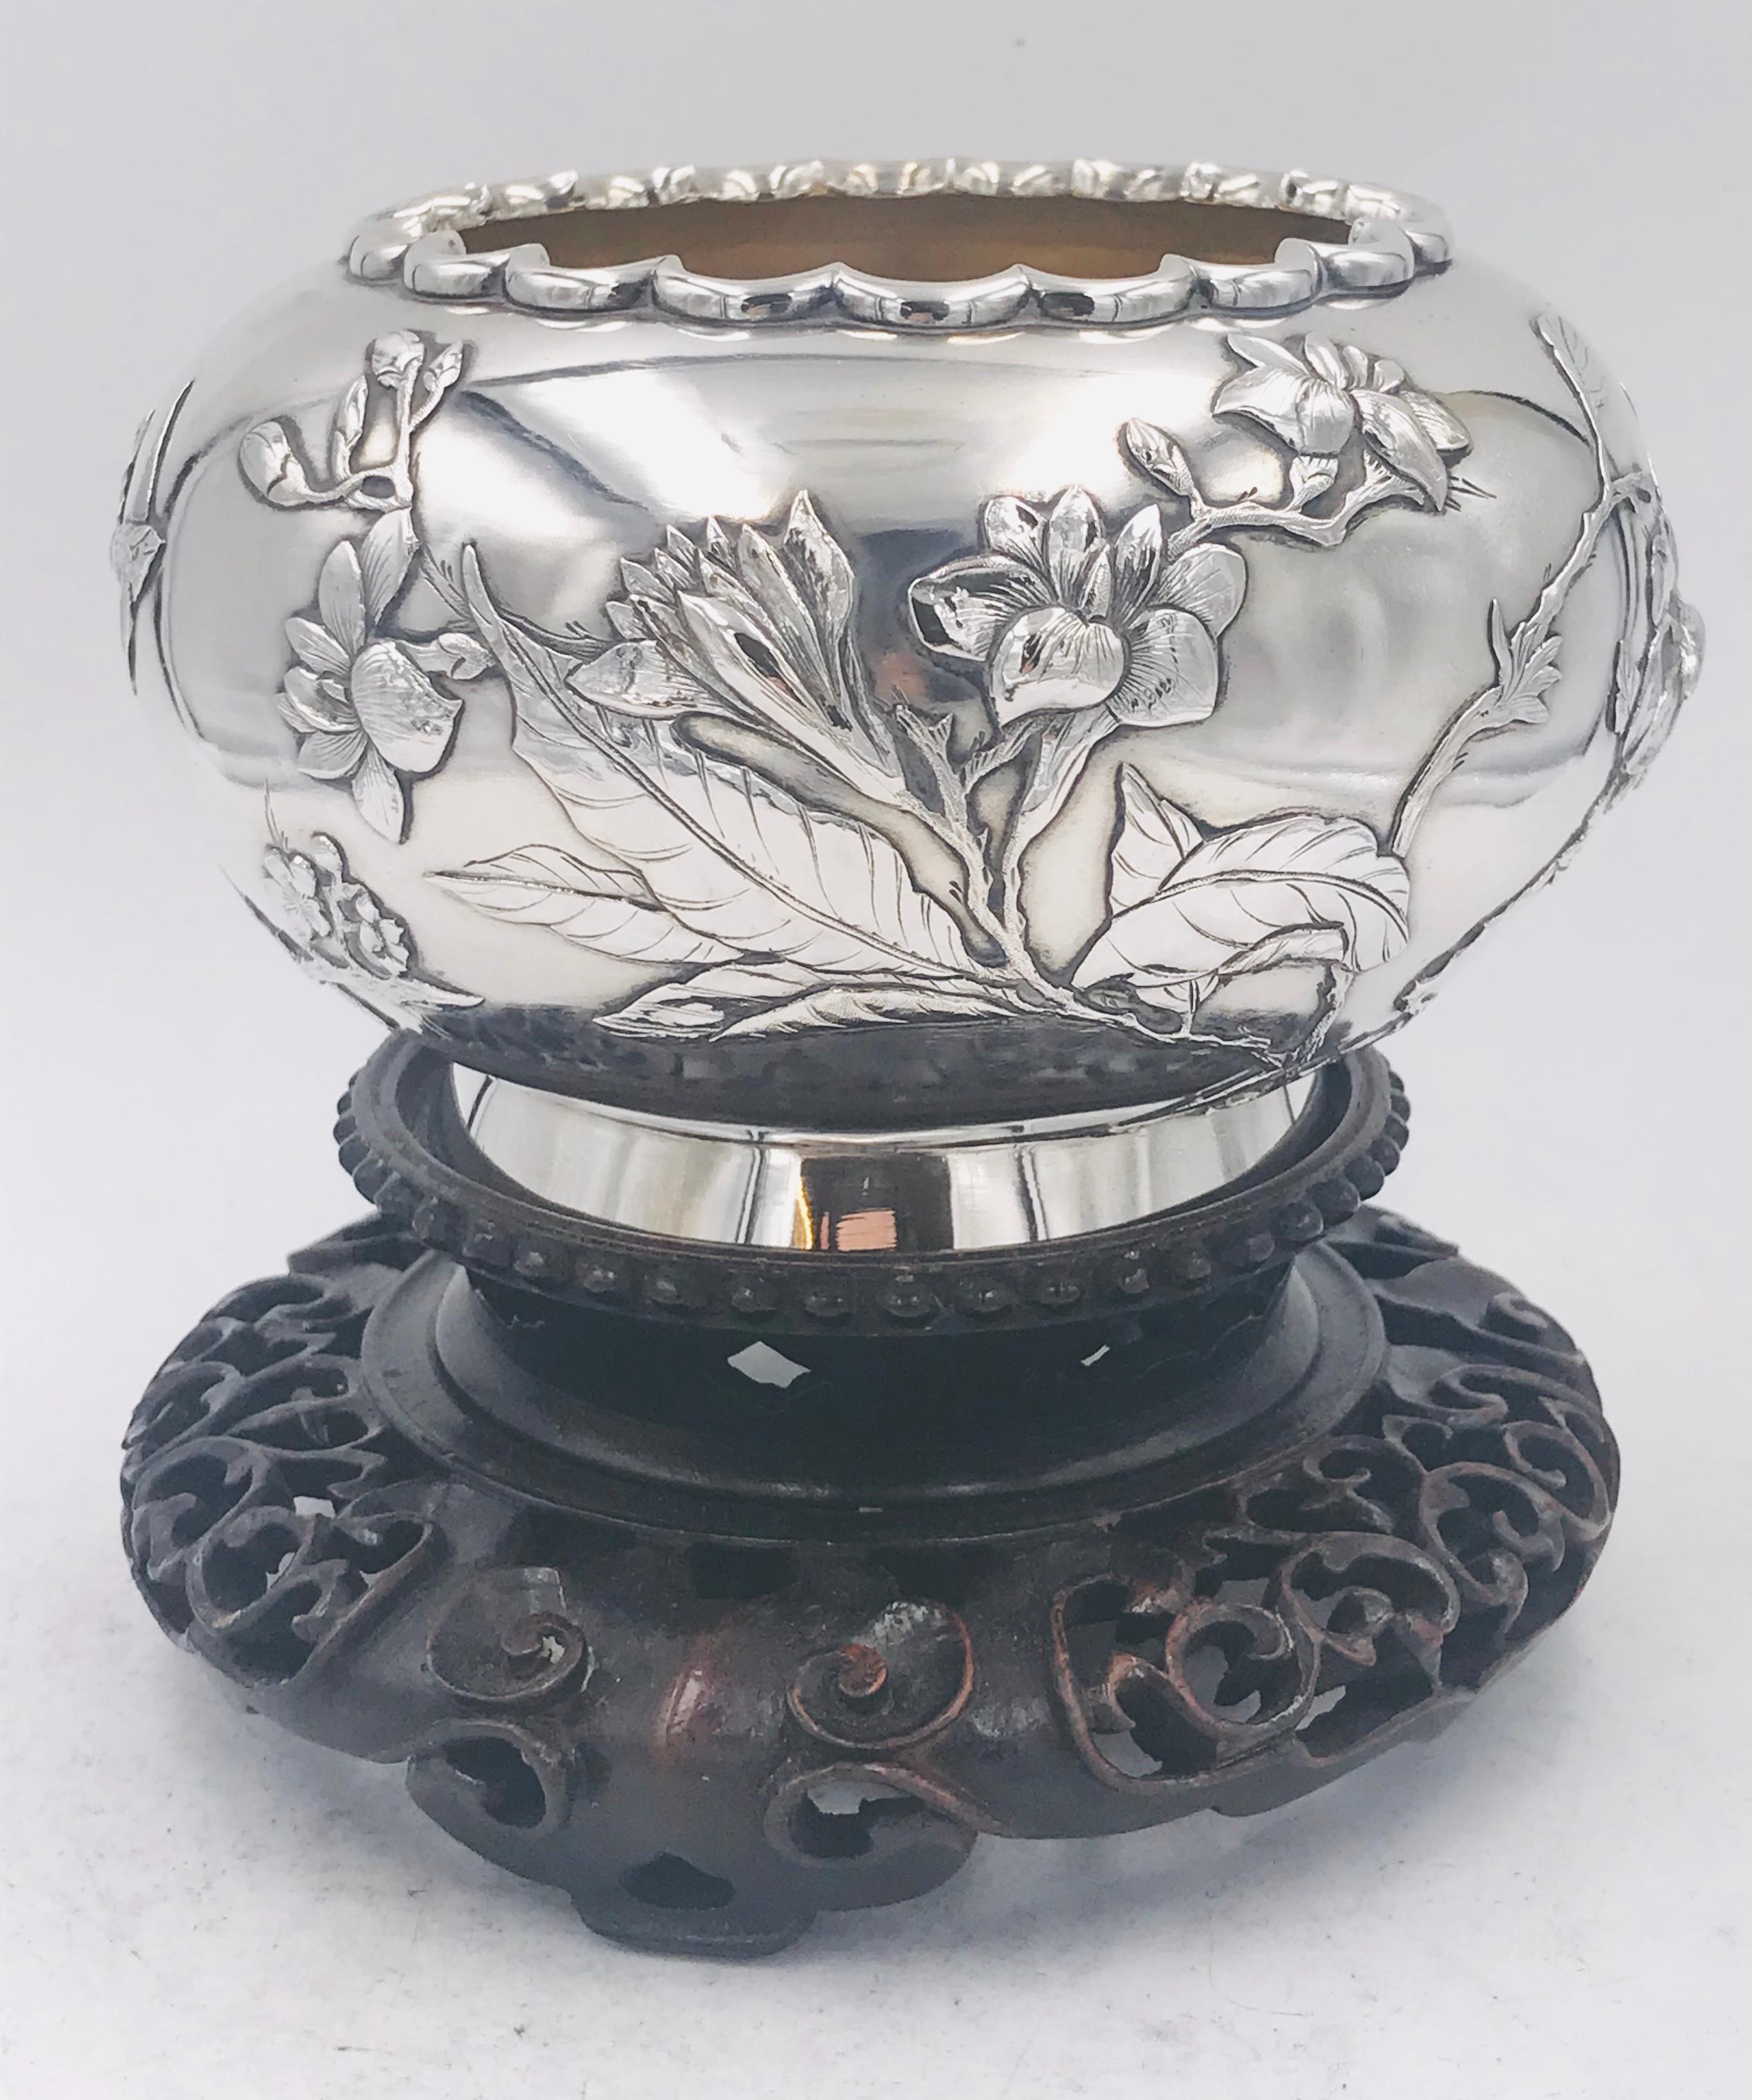 19th Century Chinese Silver Export Silver Bowl